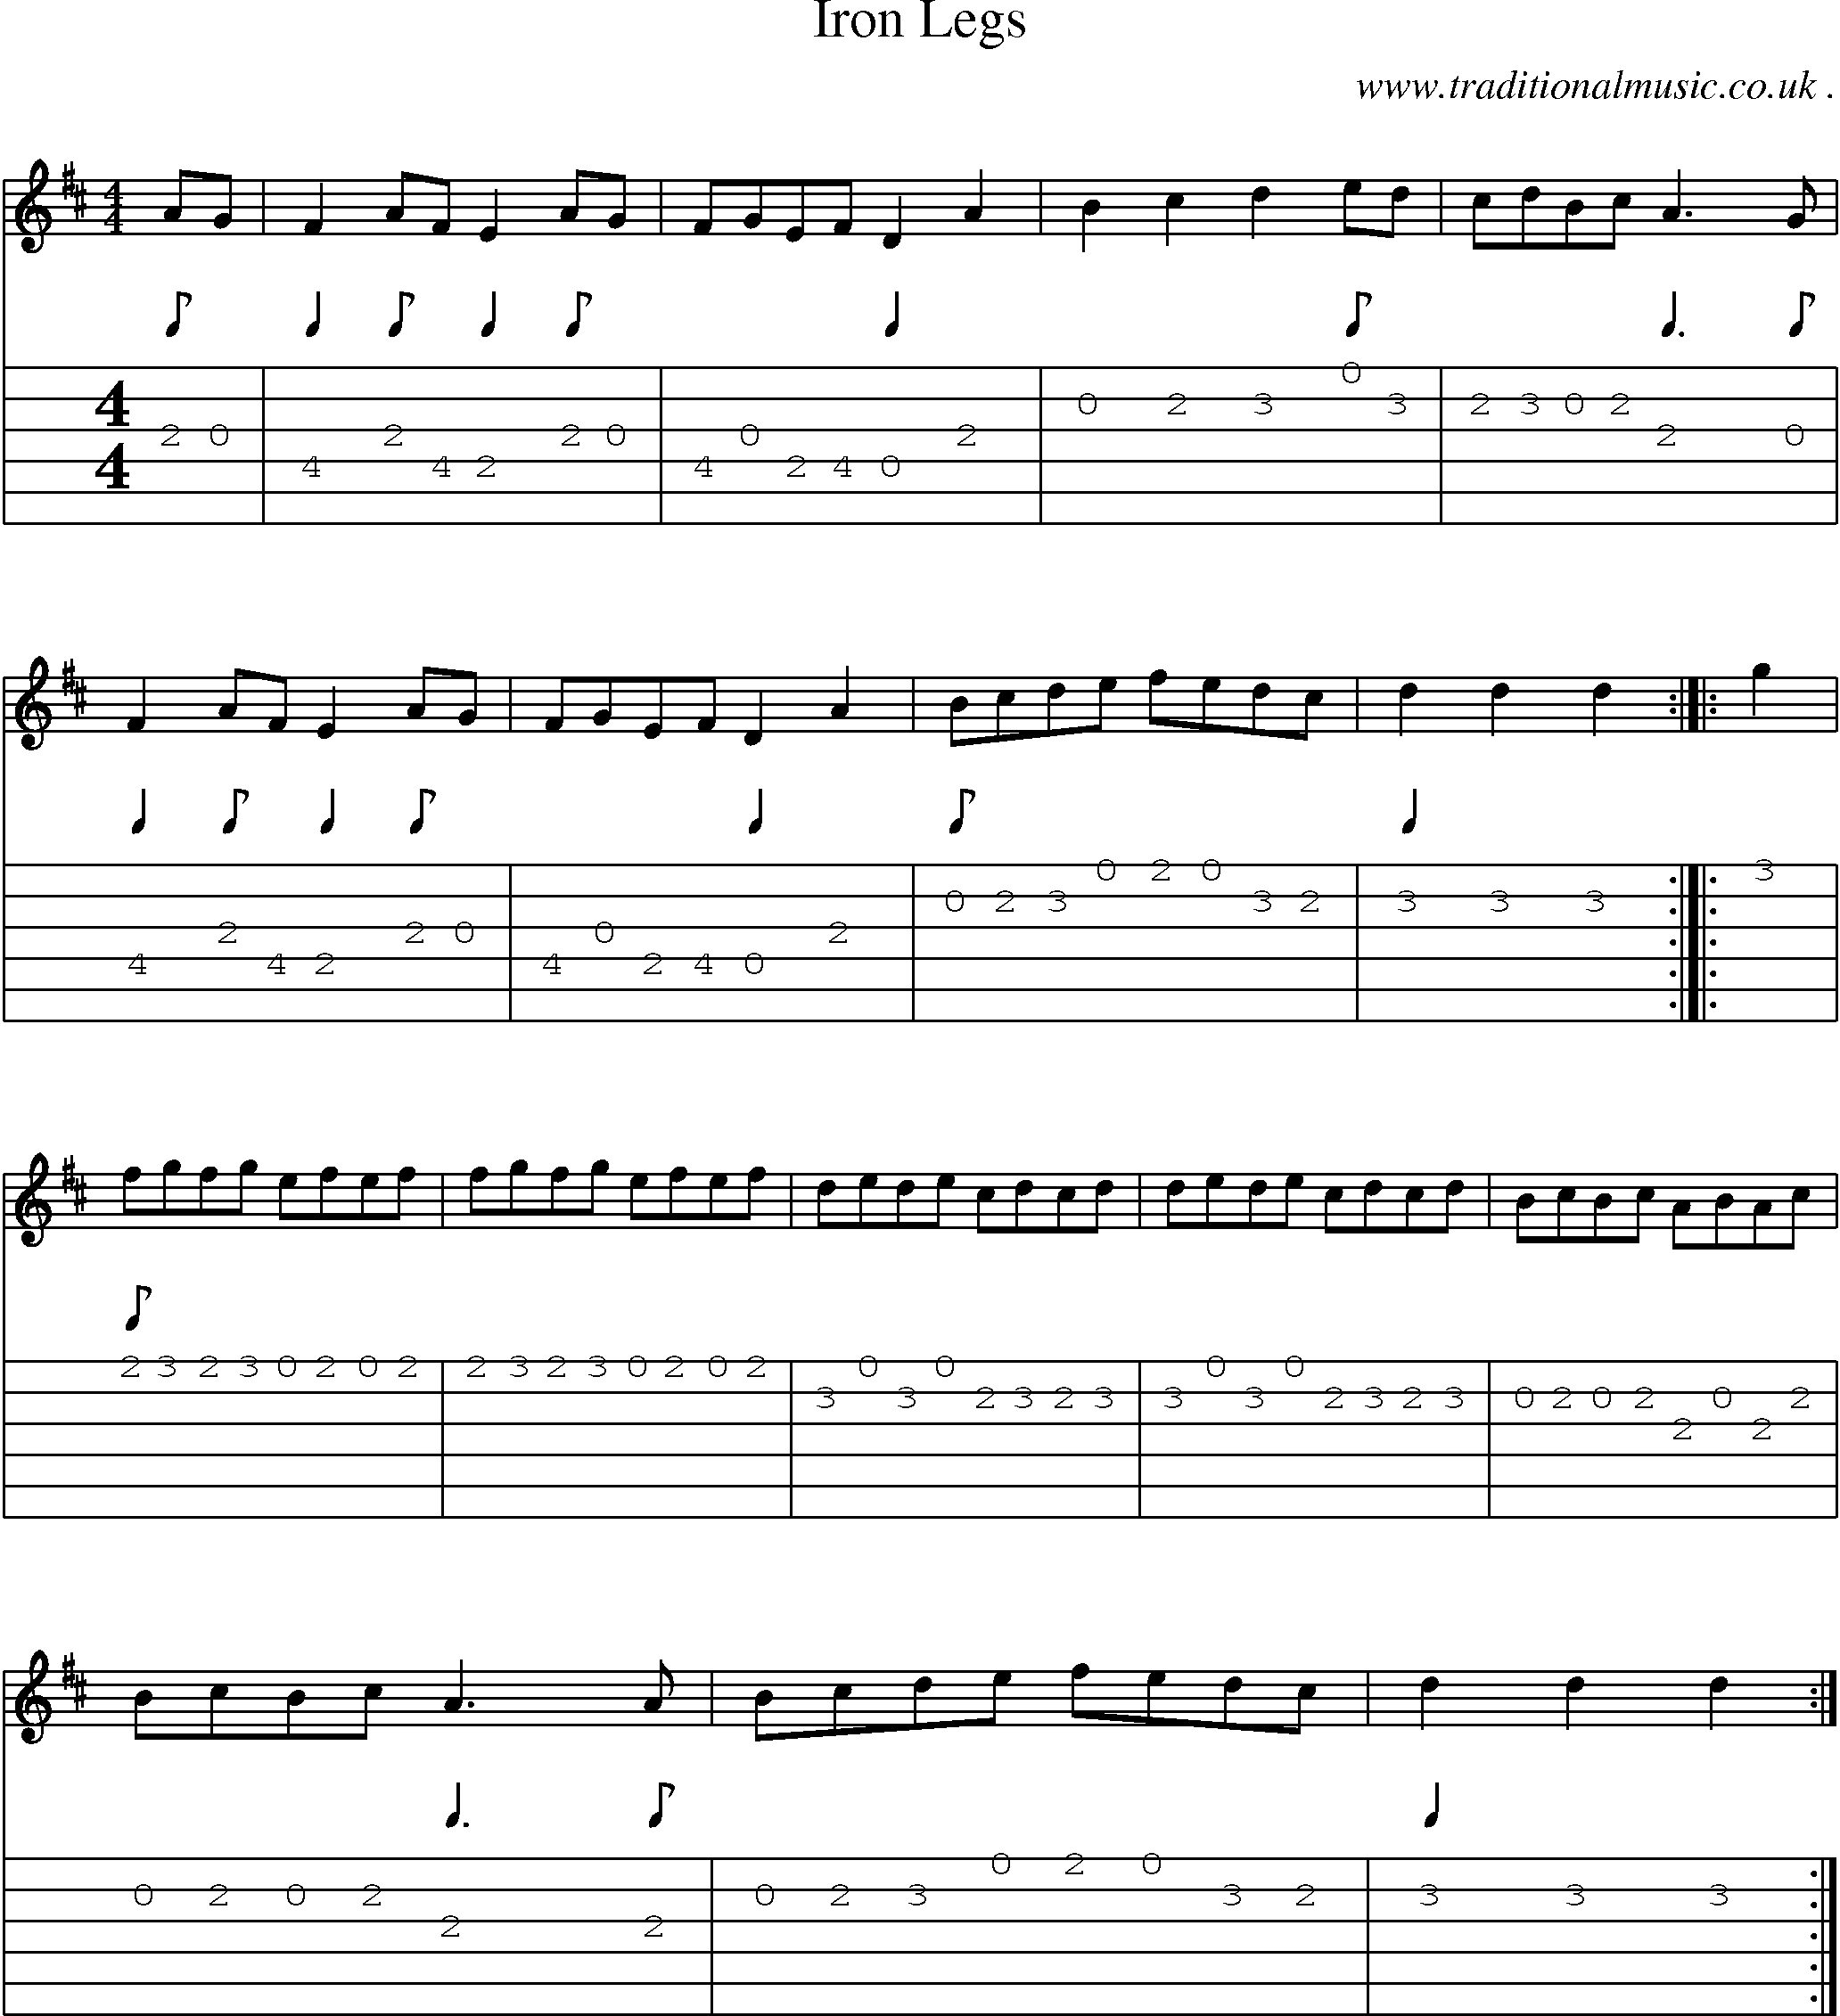 Sheet-music  score, Chords and Guitar Tabs for Iron Legs